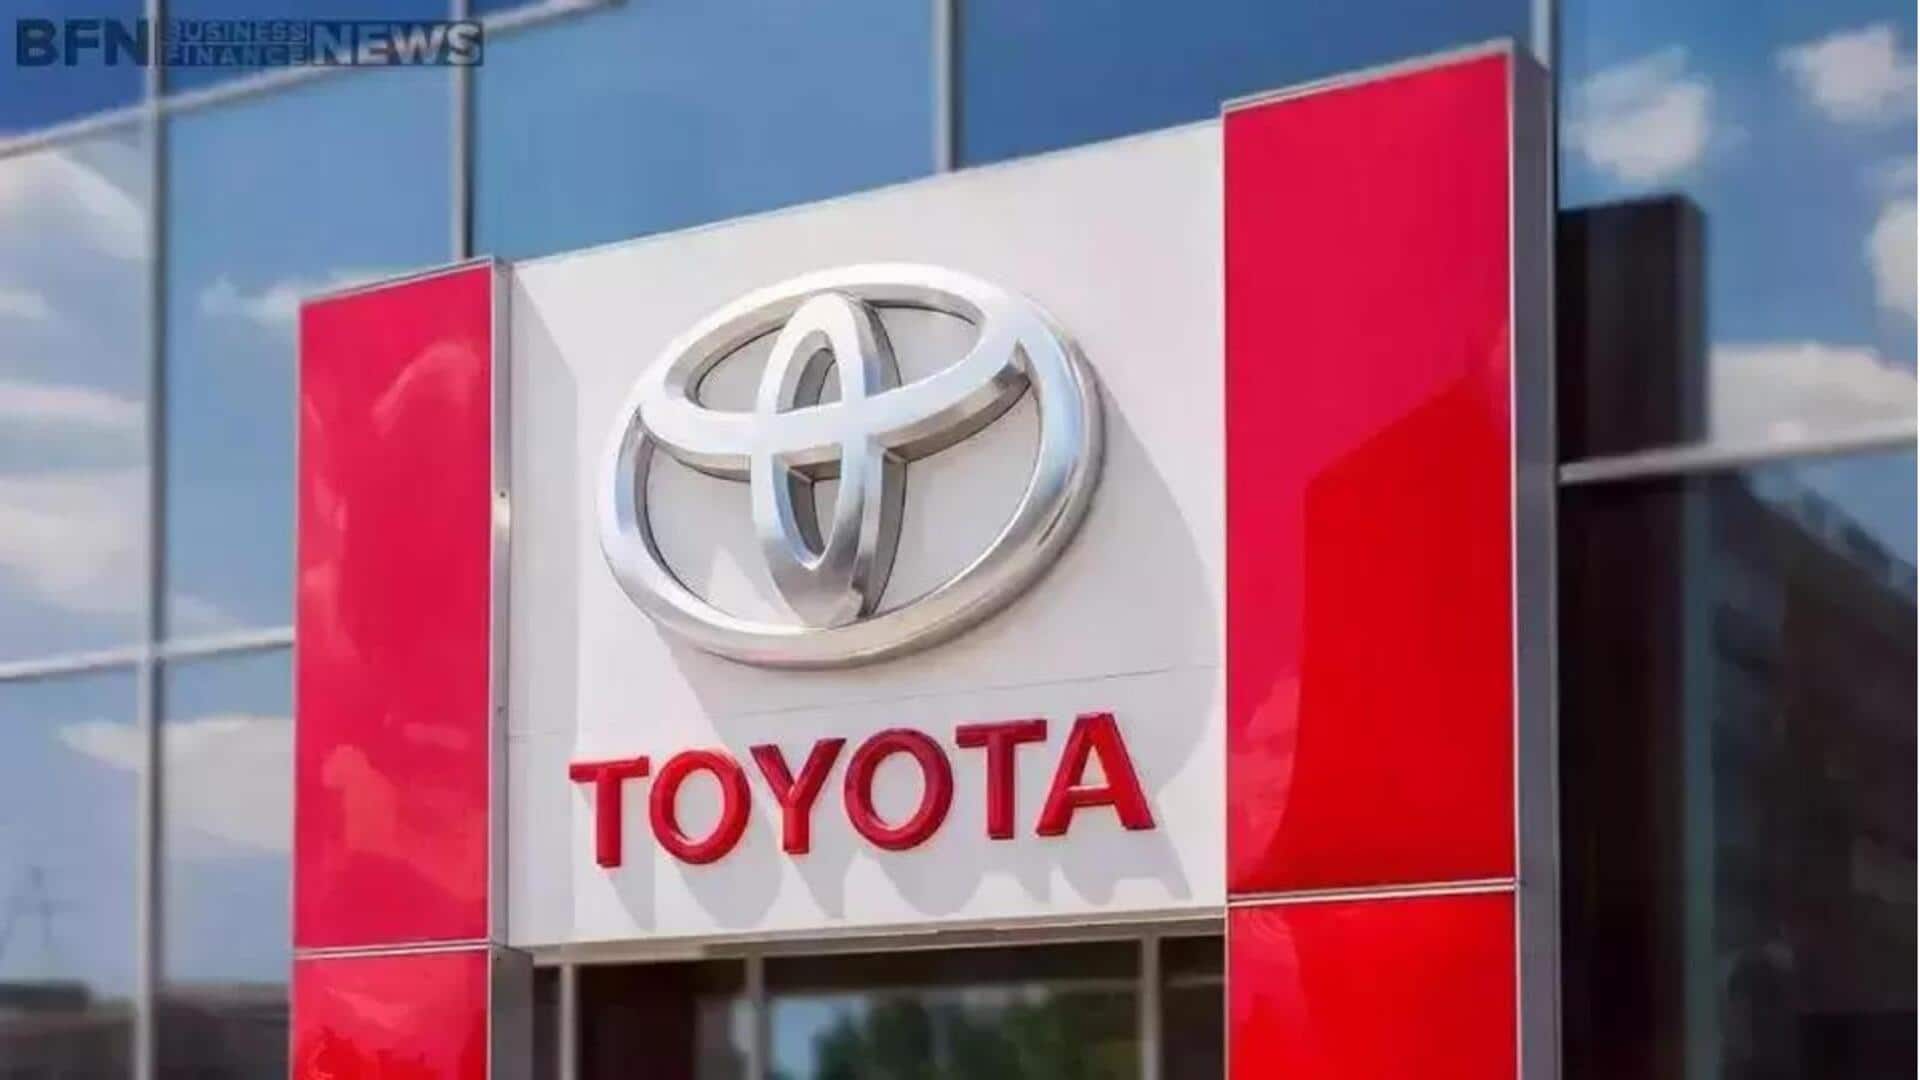 Toyota's global sales witness hefty growth this year: Here's why